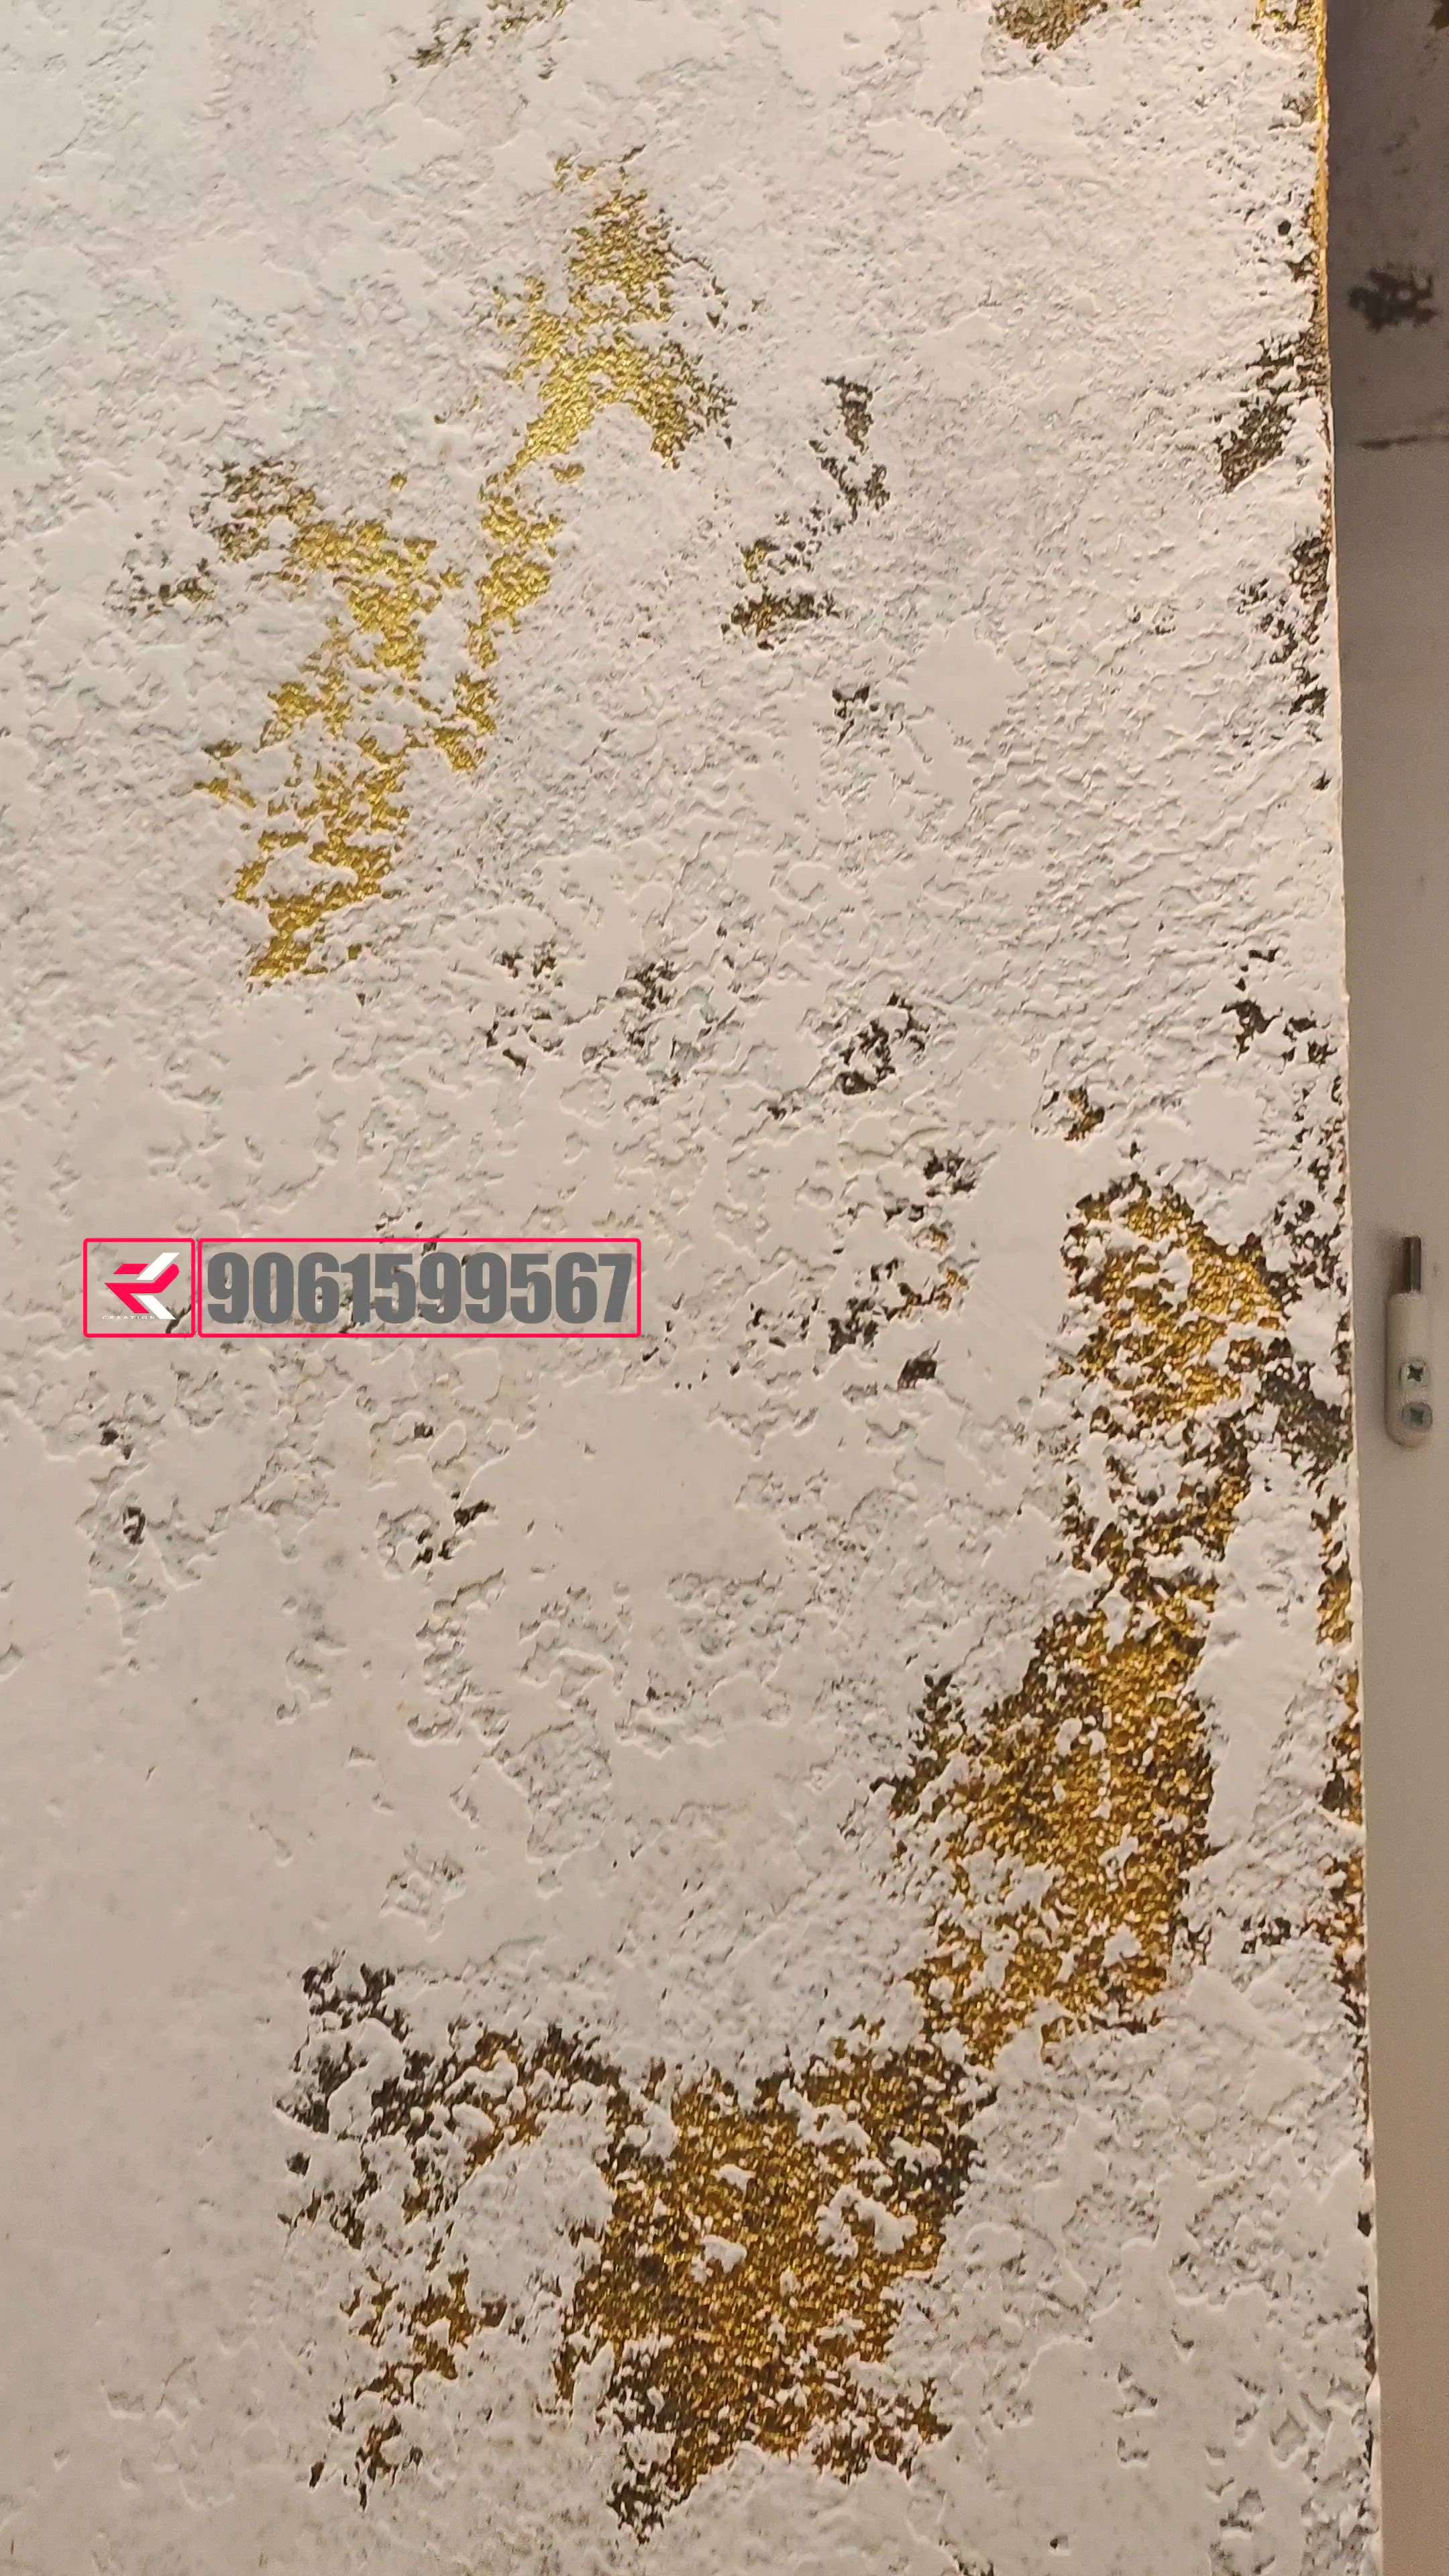 bedroom wall texture design.
wall art @thrissur













 #BedroomDecor  #quality  #WallPutty  #WallDecors  #WallDesigns  #WallPainting  #wall  #TexturePainting  #texture  #texture  #wall_texture  #texturepaint  #texturework  #InteriorDesigner  #Architectural&Interior  #interiorstylist  #Painter  #painters  #paints  #asianpaint  #architecturedesigns  #DecorIdeas  #decorative  #HouseDesigns  #Thrissur